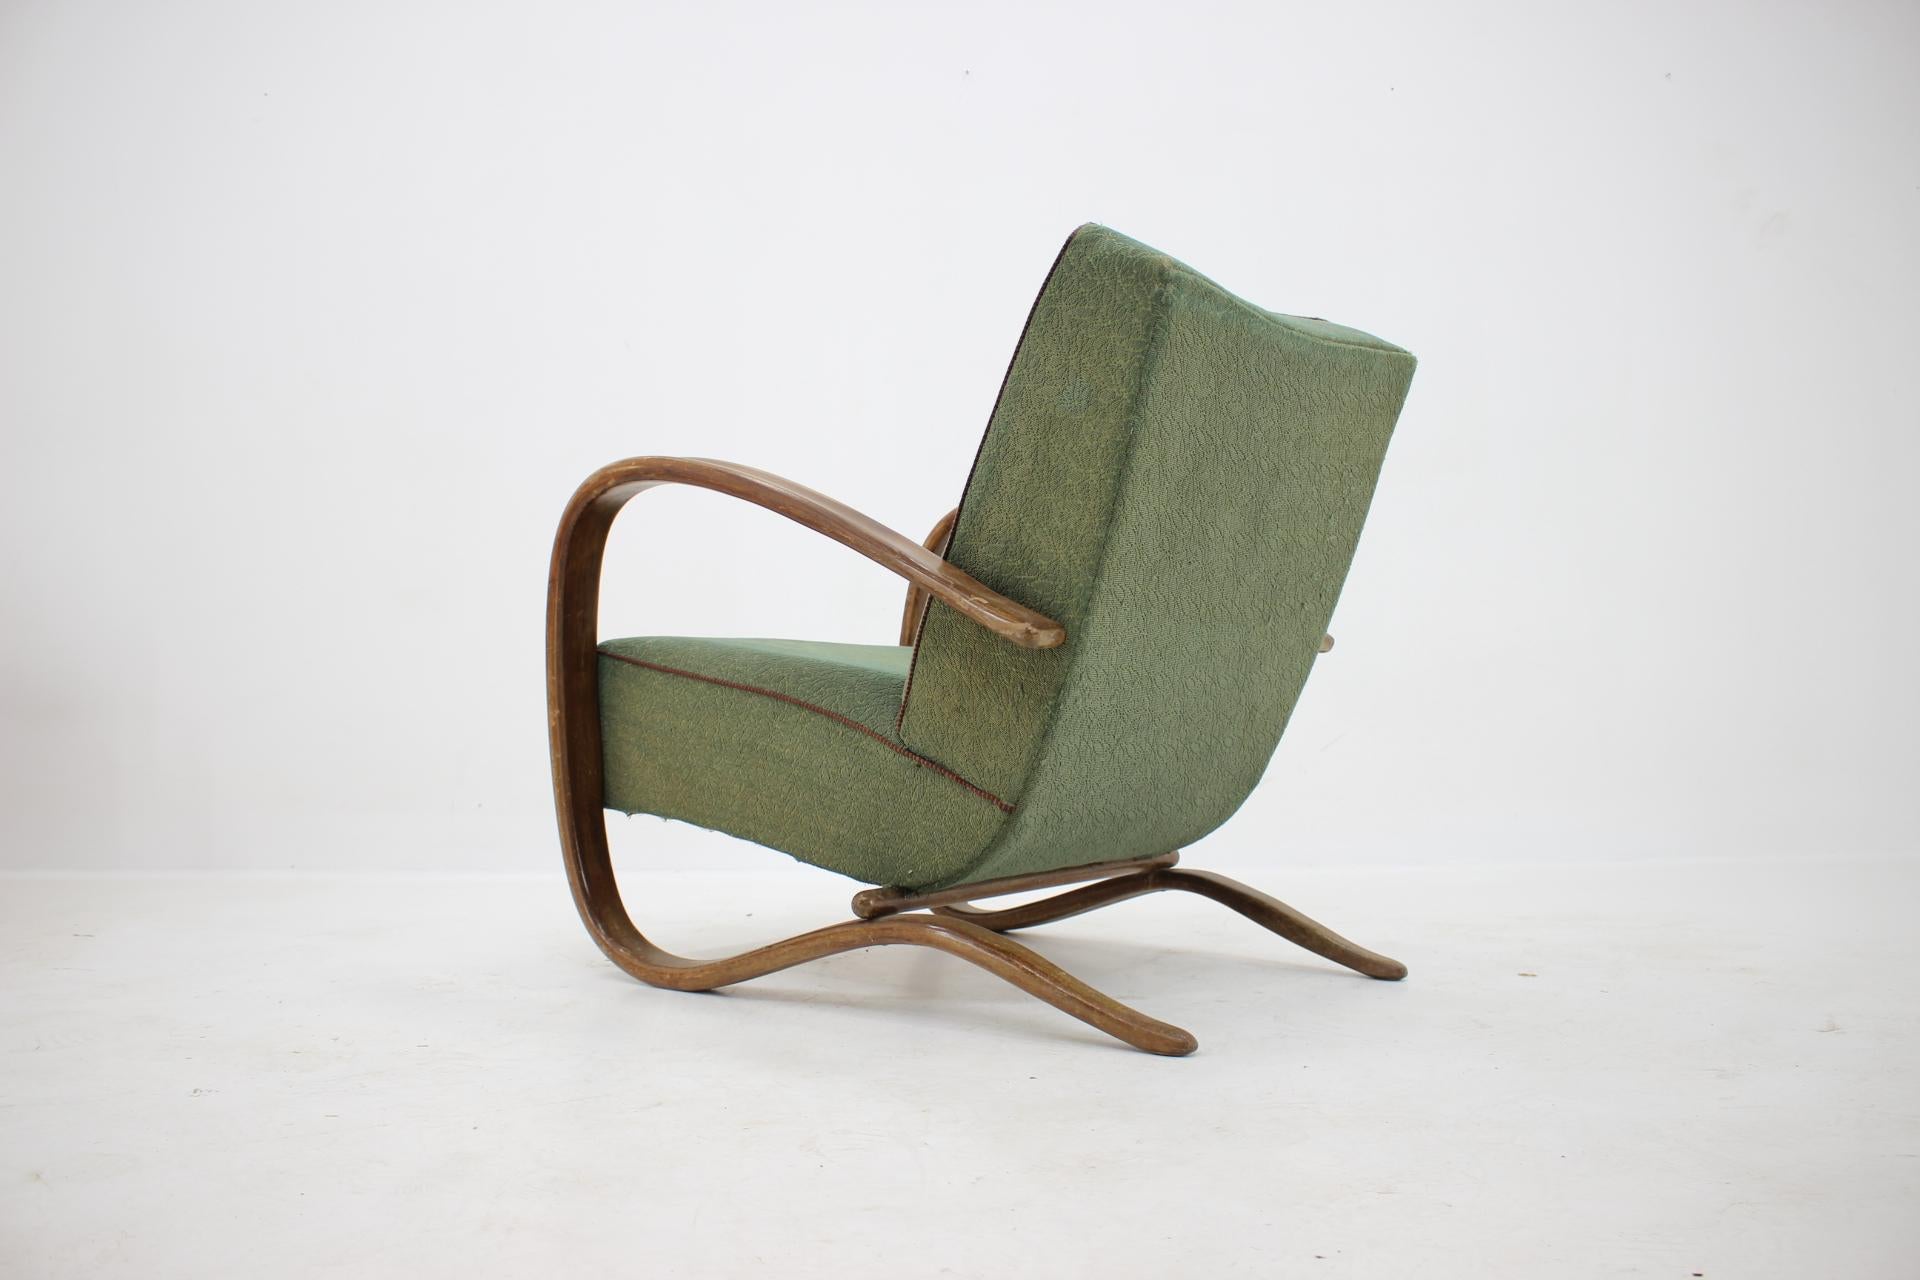 - Czechoslovakia, 1930s
- maker: Thonet (marked)
- good original condition suitable for new upholstery.
 